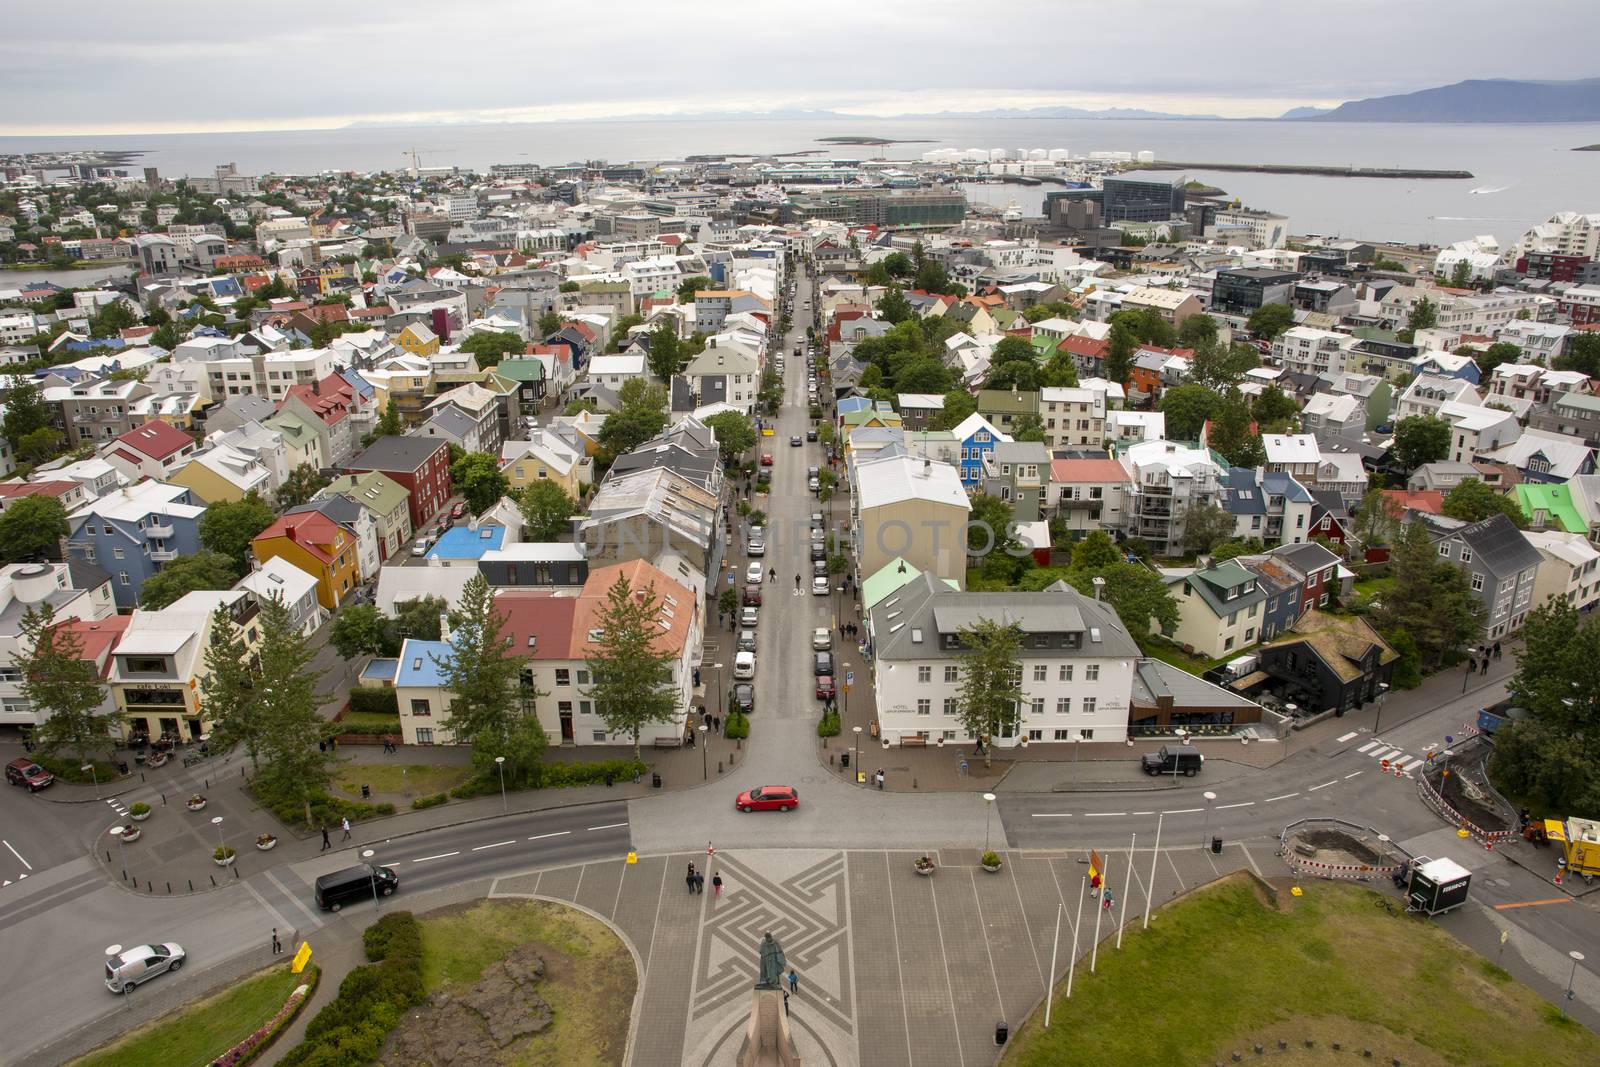 Reykjavik, Iceland, skyline and cityscape with view over houses and skolavordustigur. Aerial. by kb79